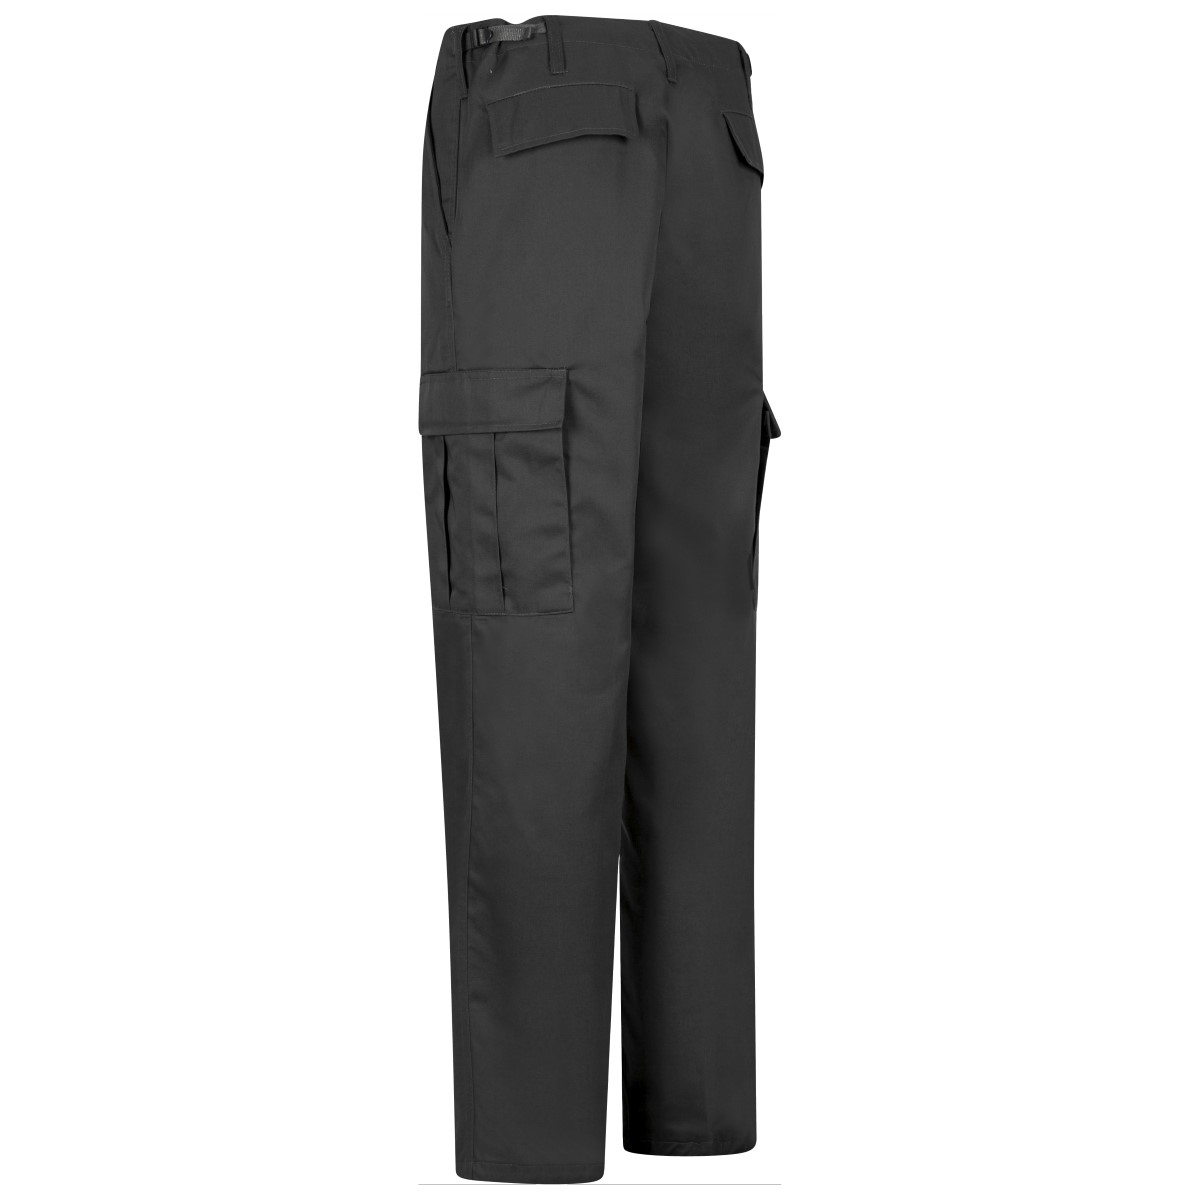 SGS Cargo Canadian Pants Black - Army Supply Store Military